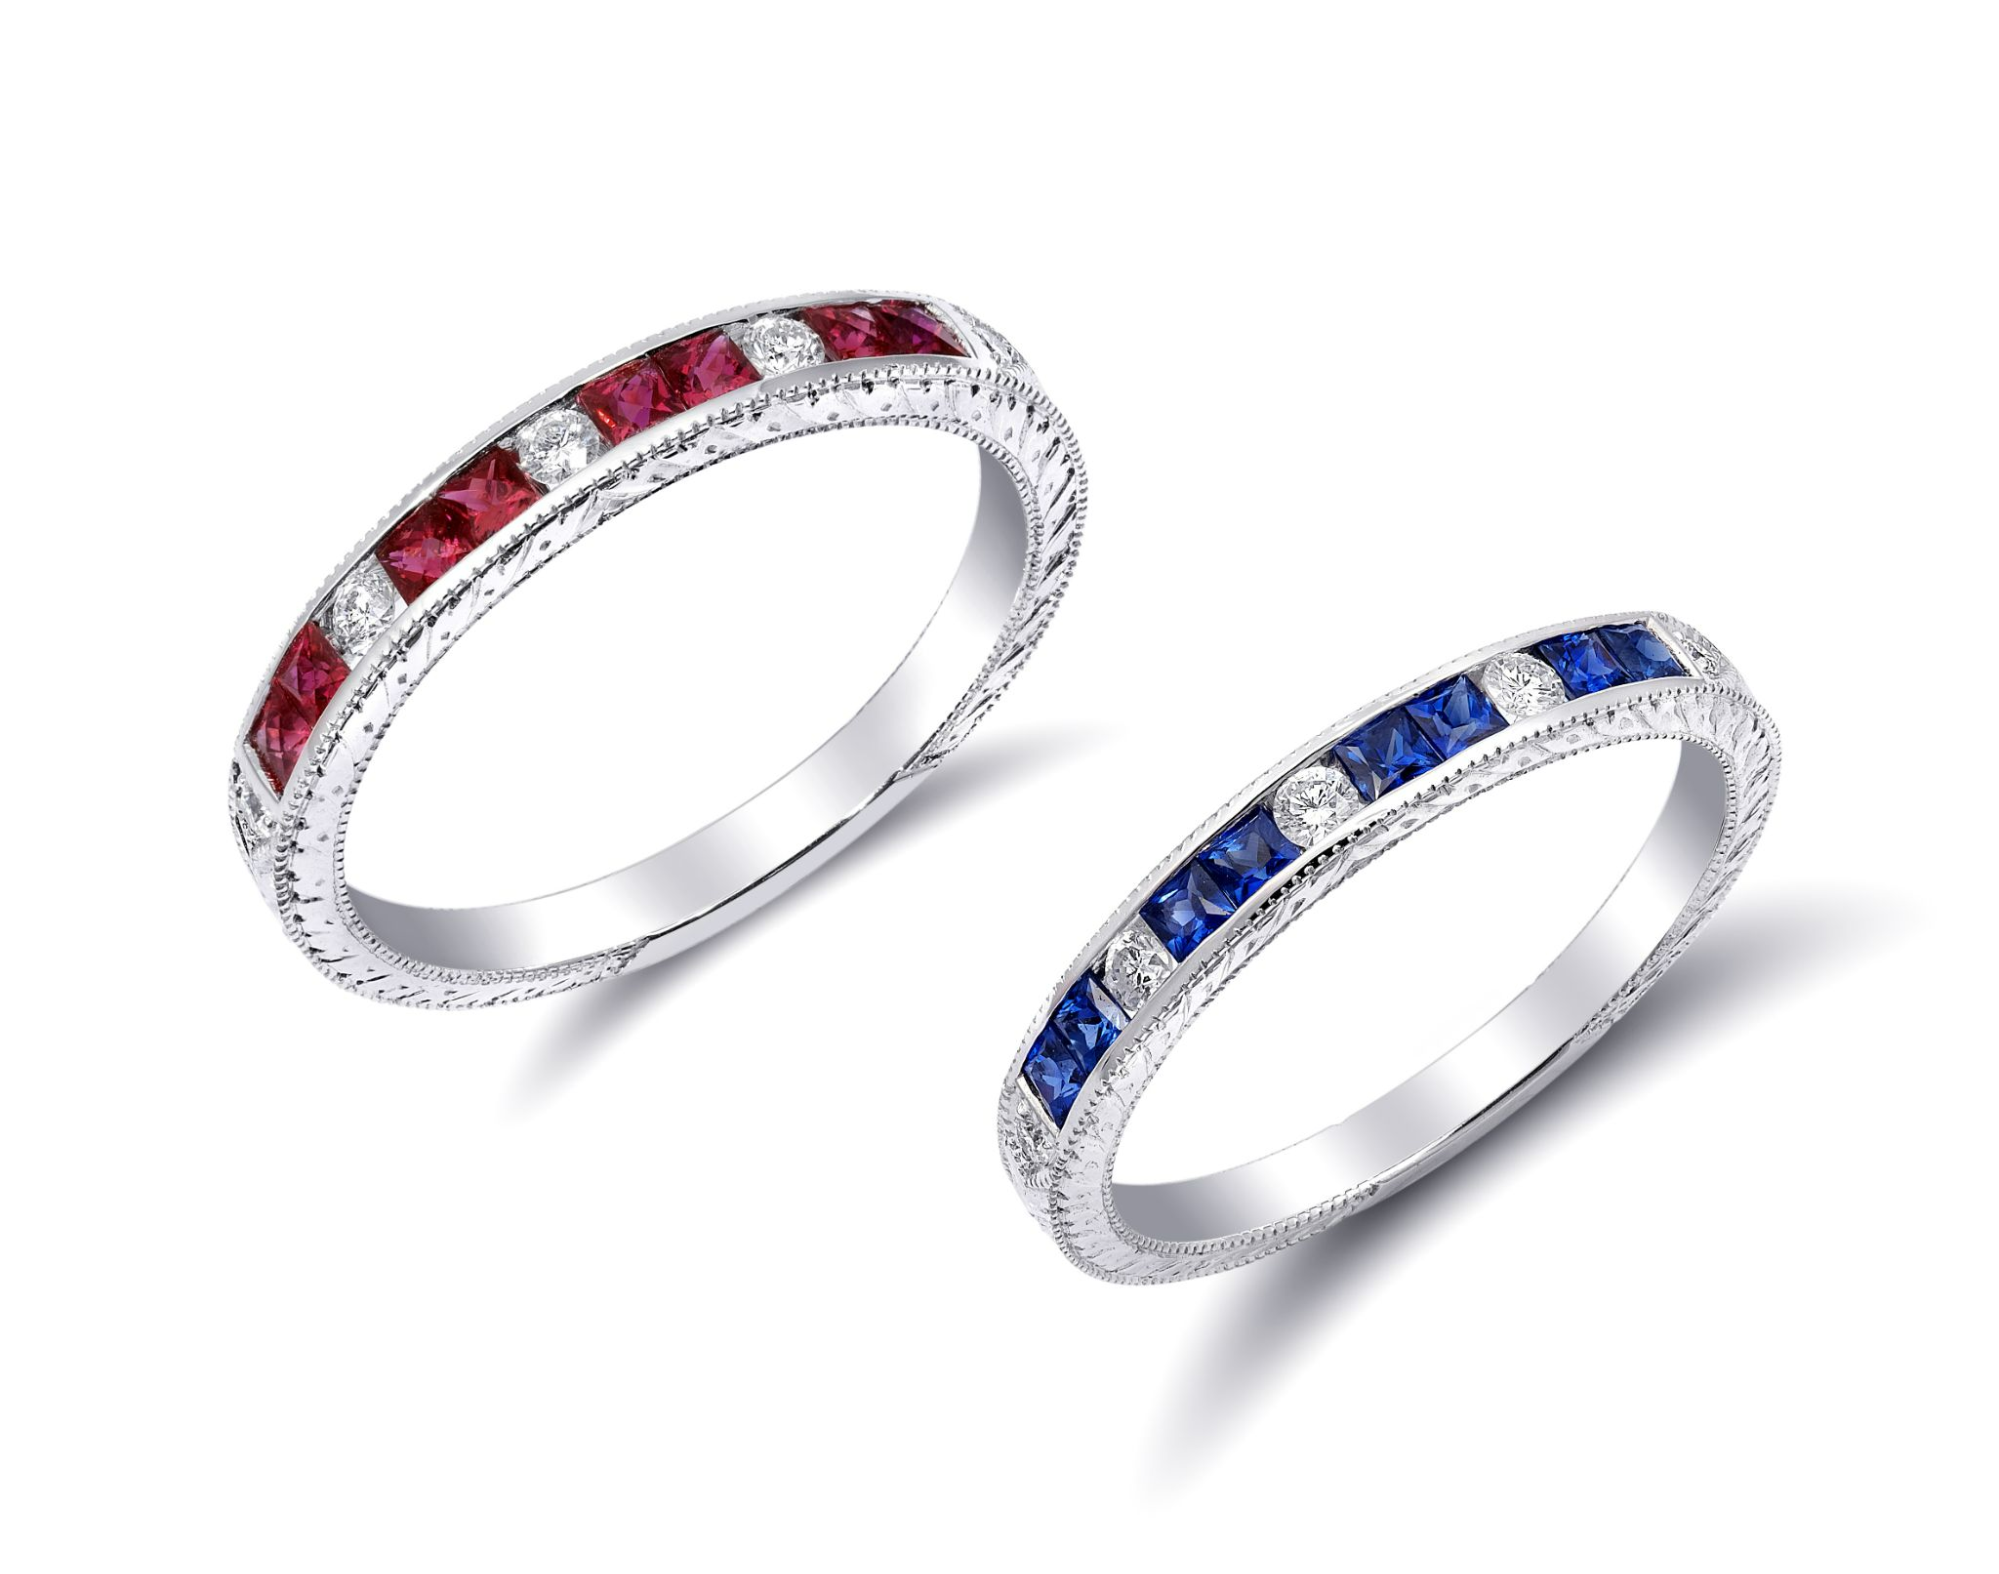 A pair of birthstone stacking rings against a white backdrop